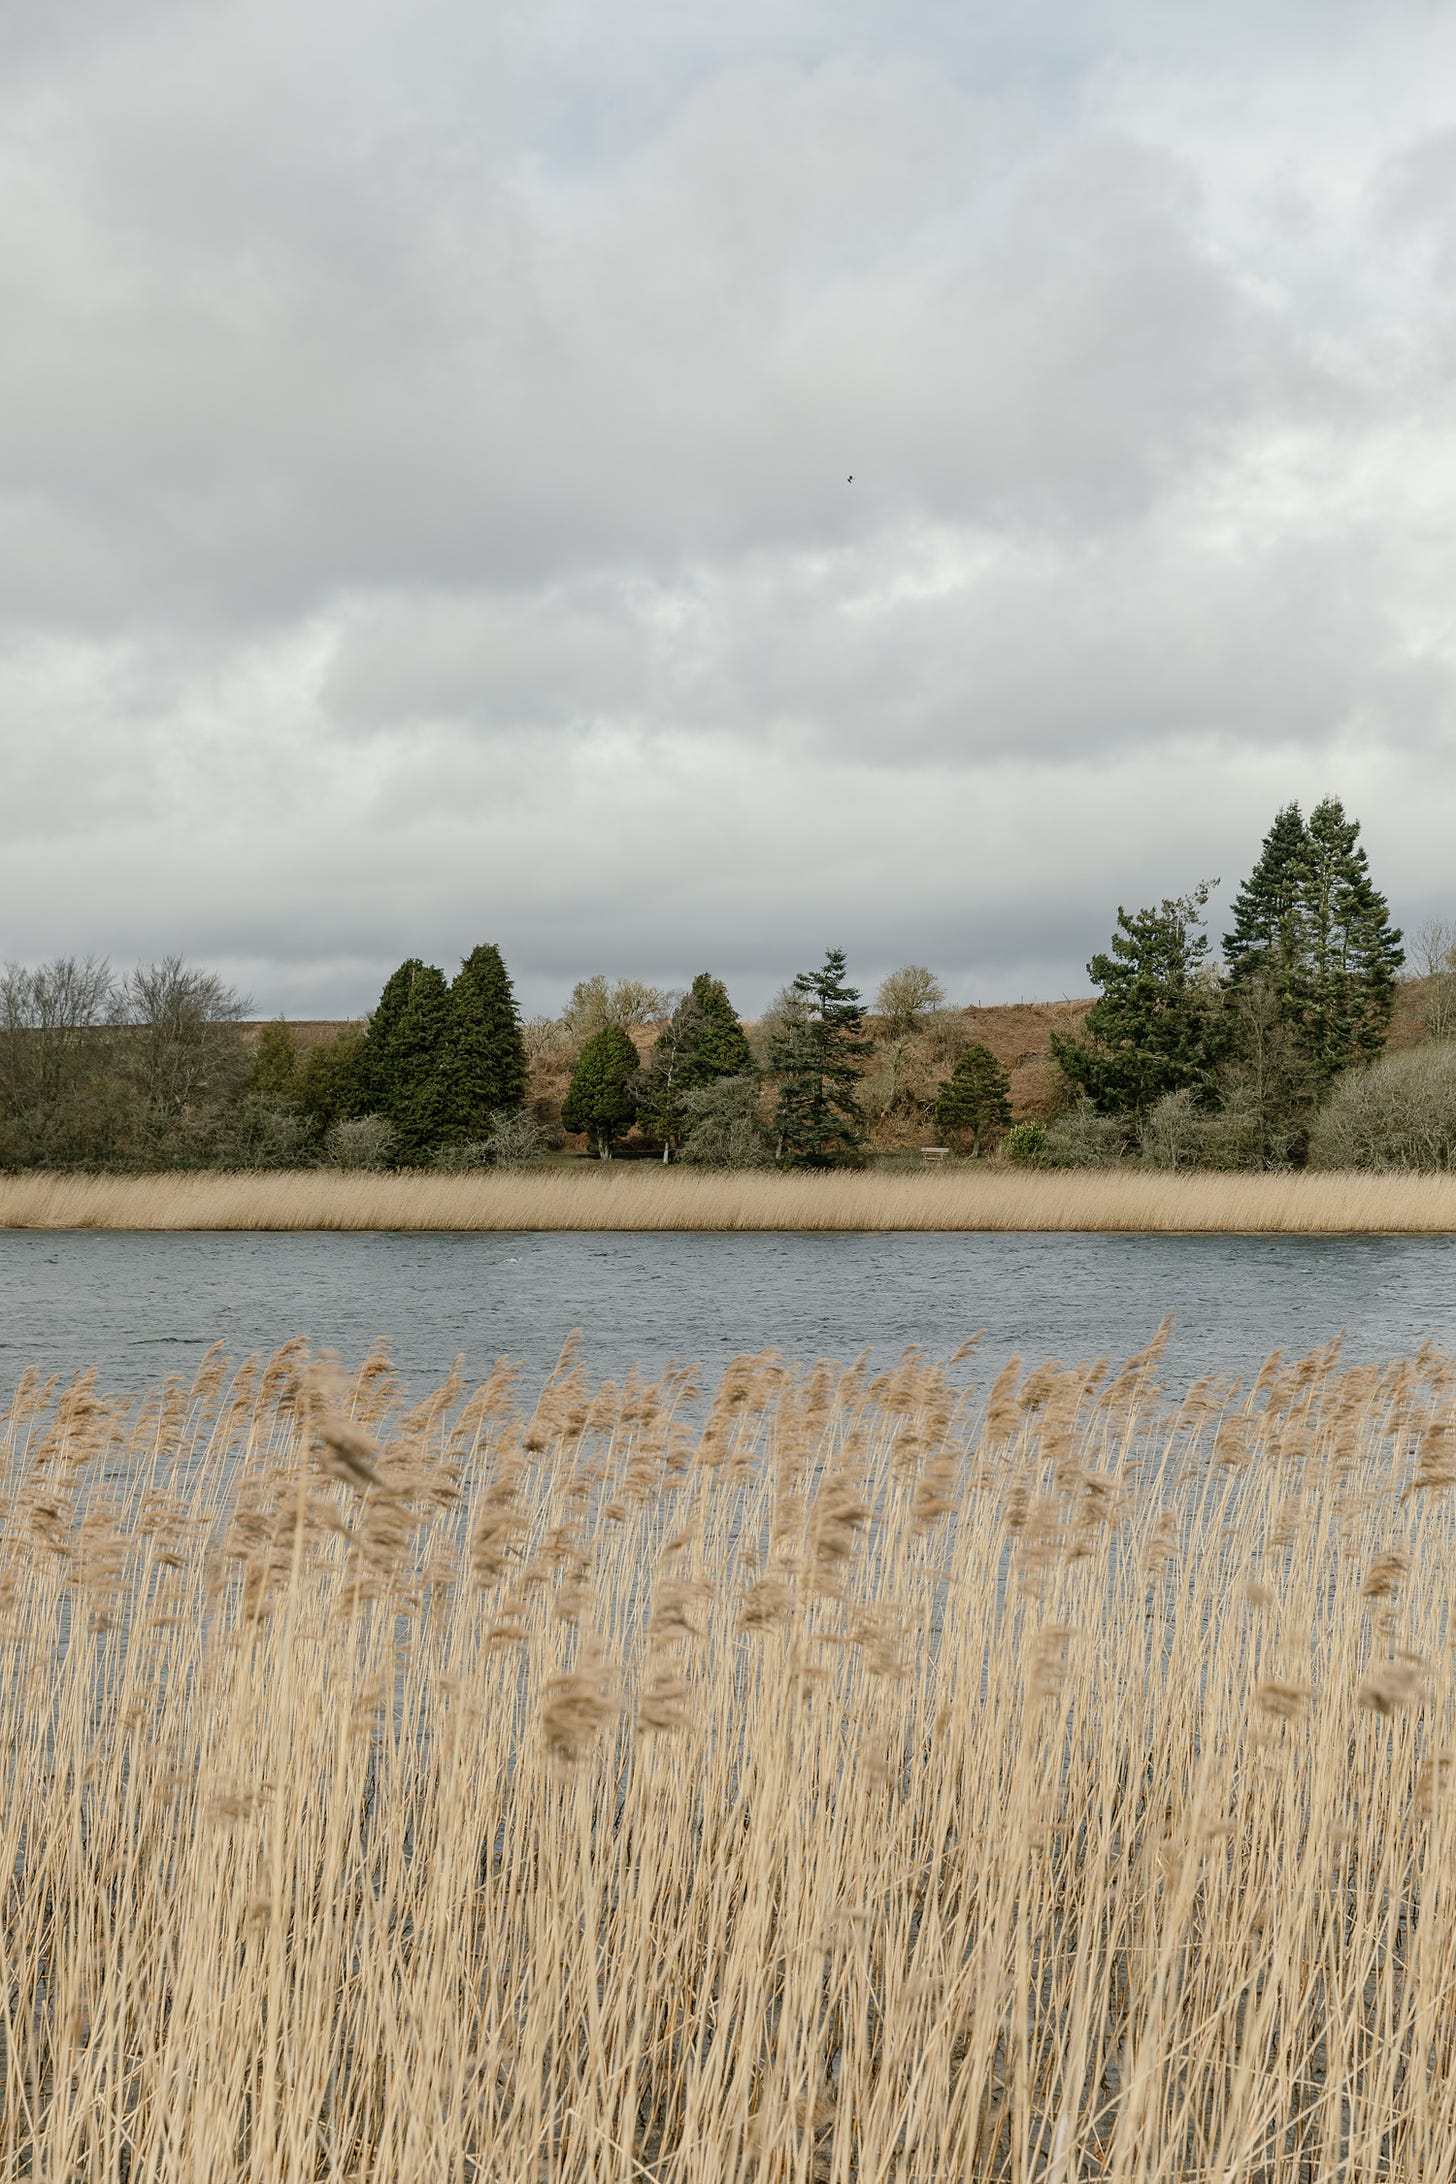 A photograph of a Scottish lake and pine trees with reeds in the foreground.